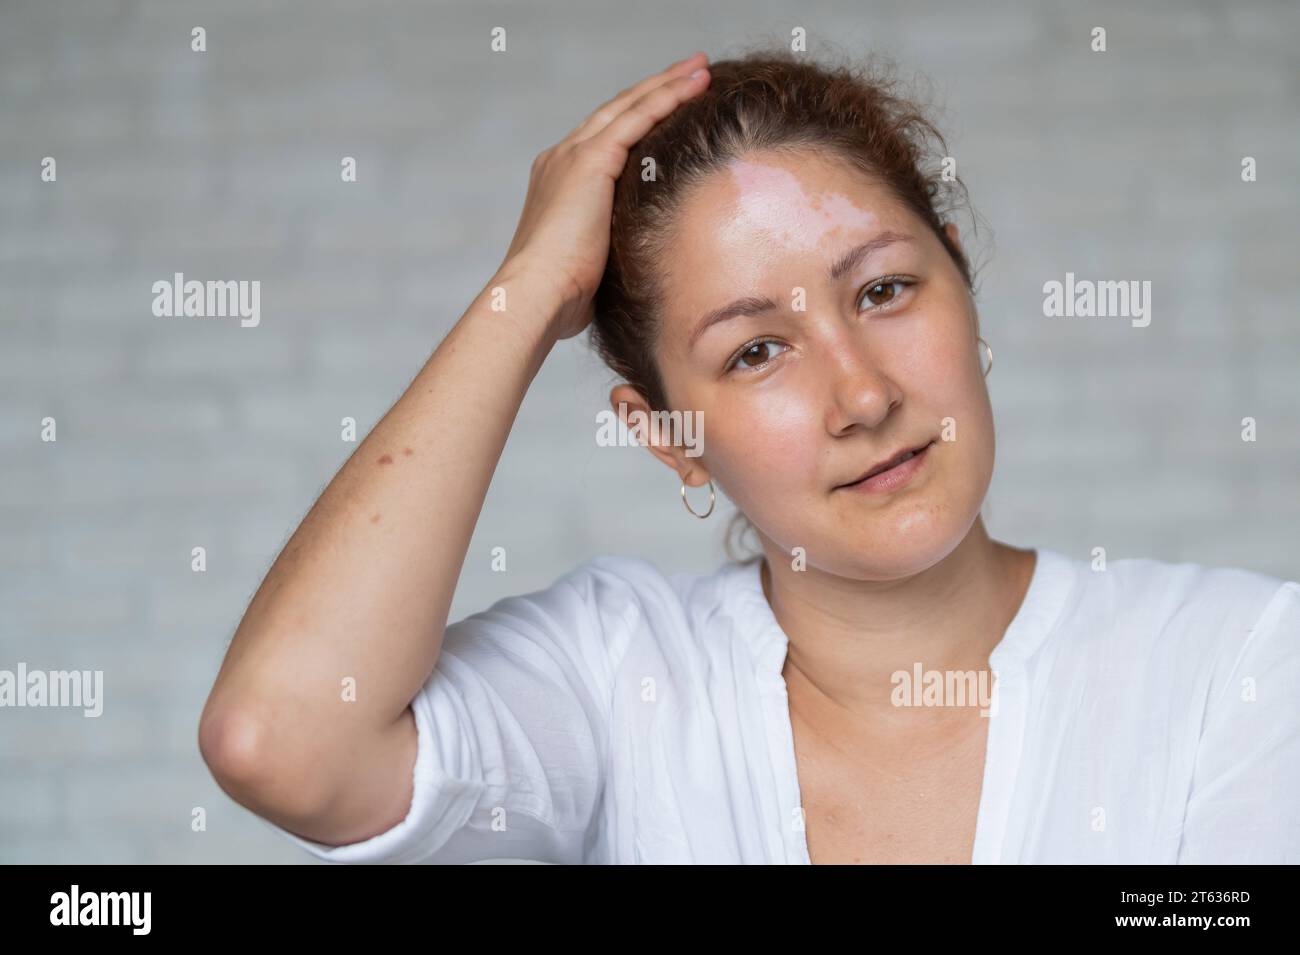 Portrait of a smiling woman with a pigmented spot on her forehead. Girl with Vitiligo Disease. Stock Photo